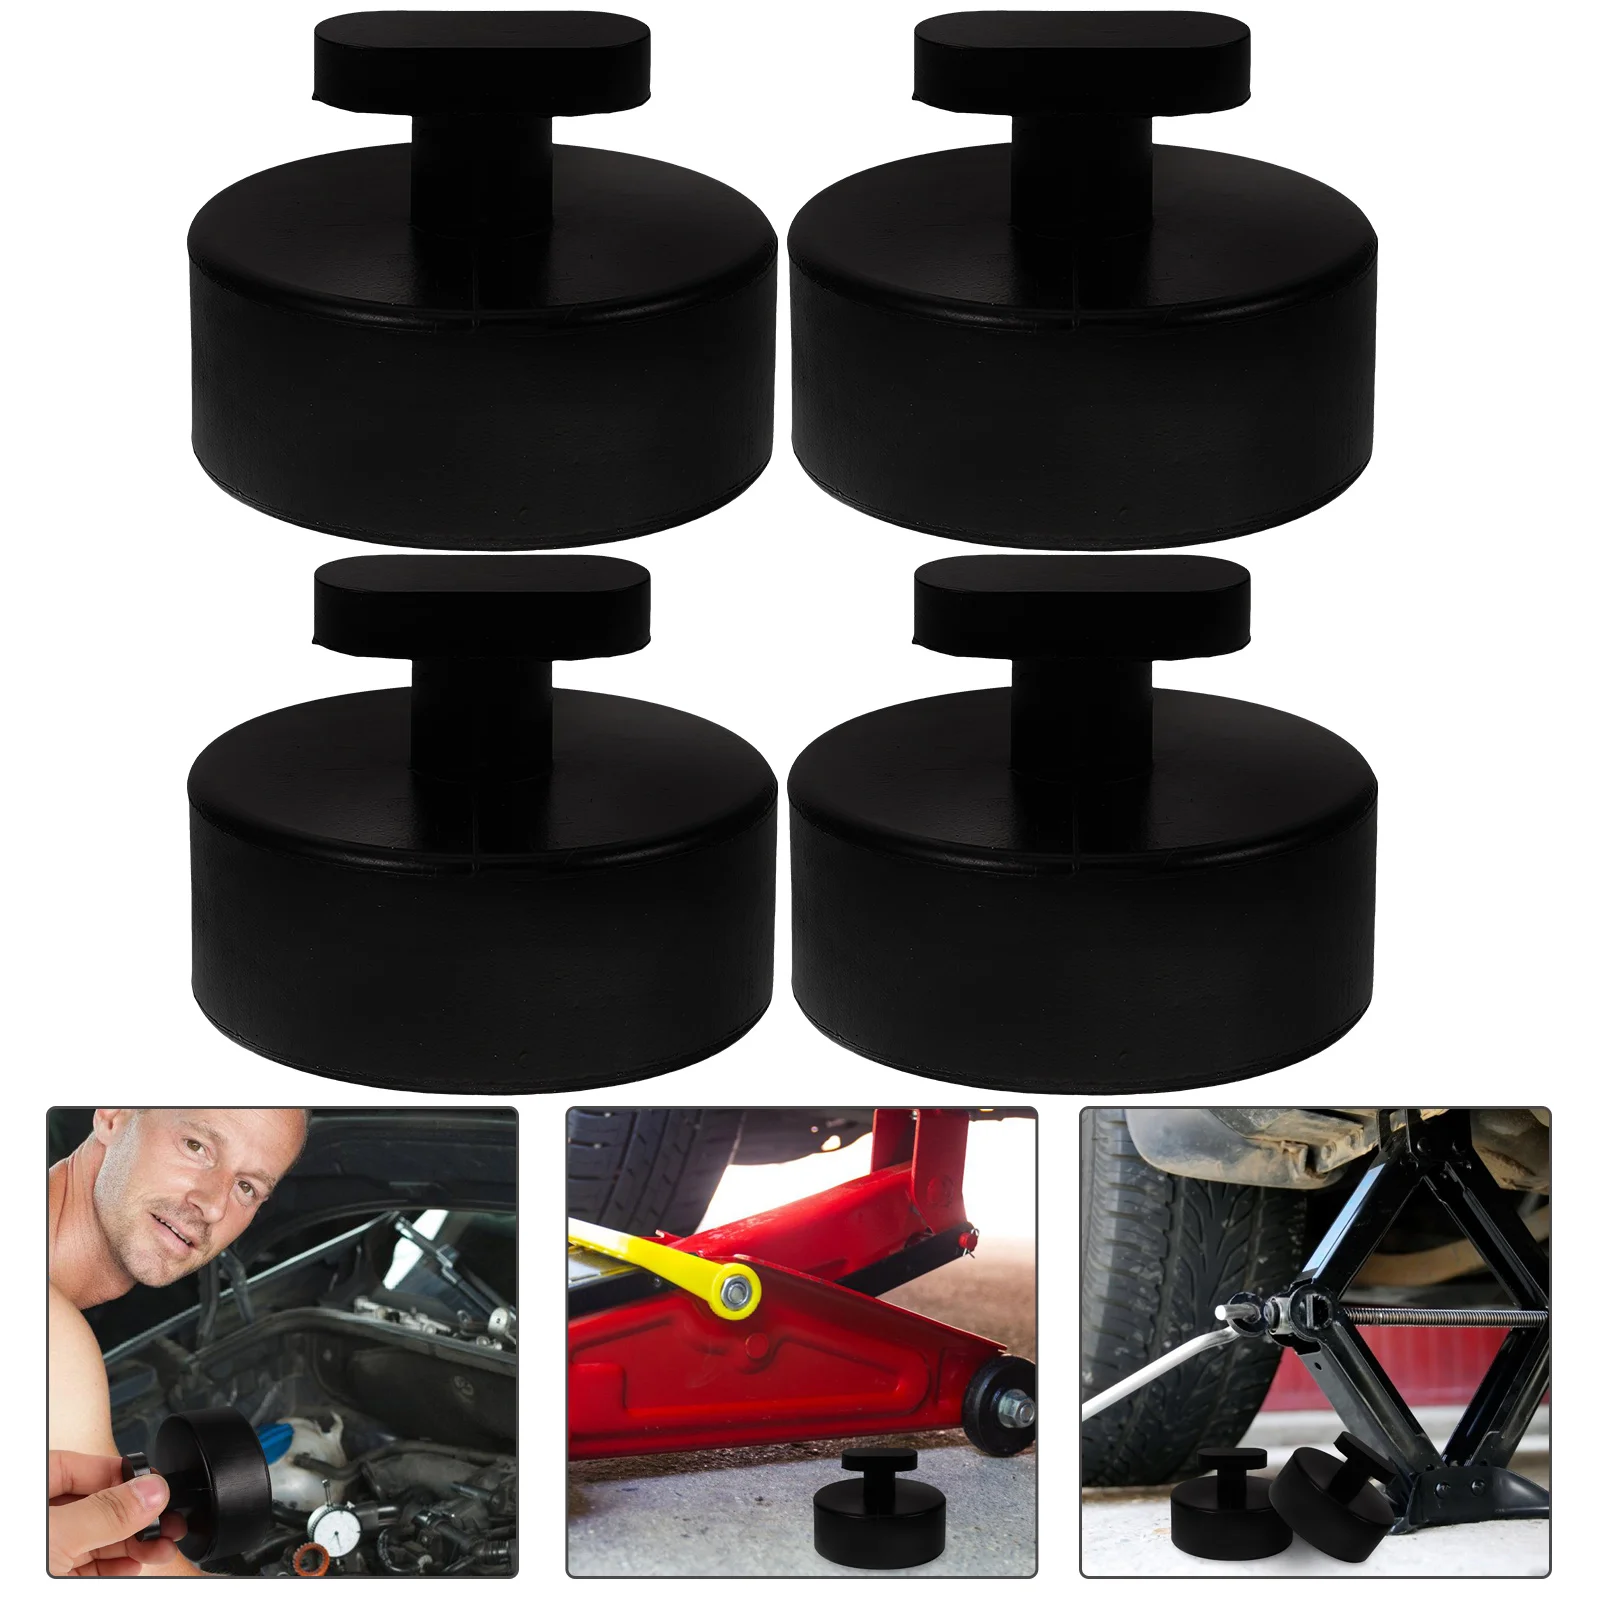 4 Pcs Car Chassis Jack Rubber Pad Support 4pcs Floor Pads Bracket for Stand Rv Pinch Welds Black Mat цена и фото